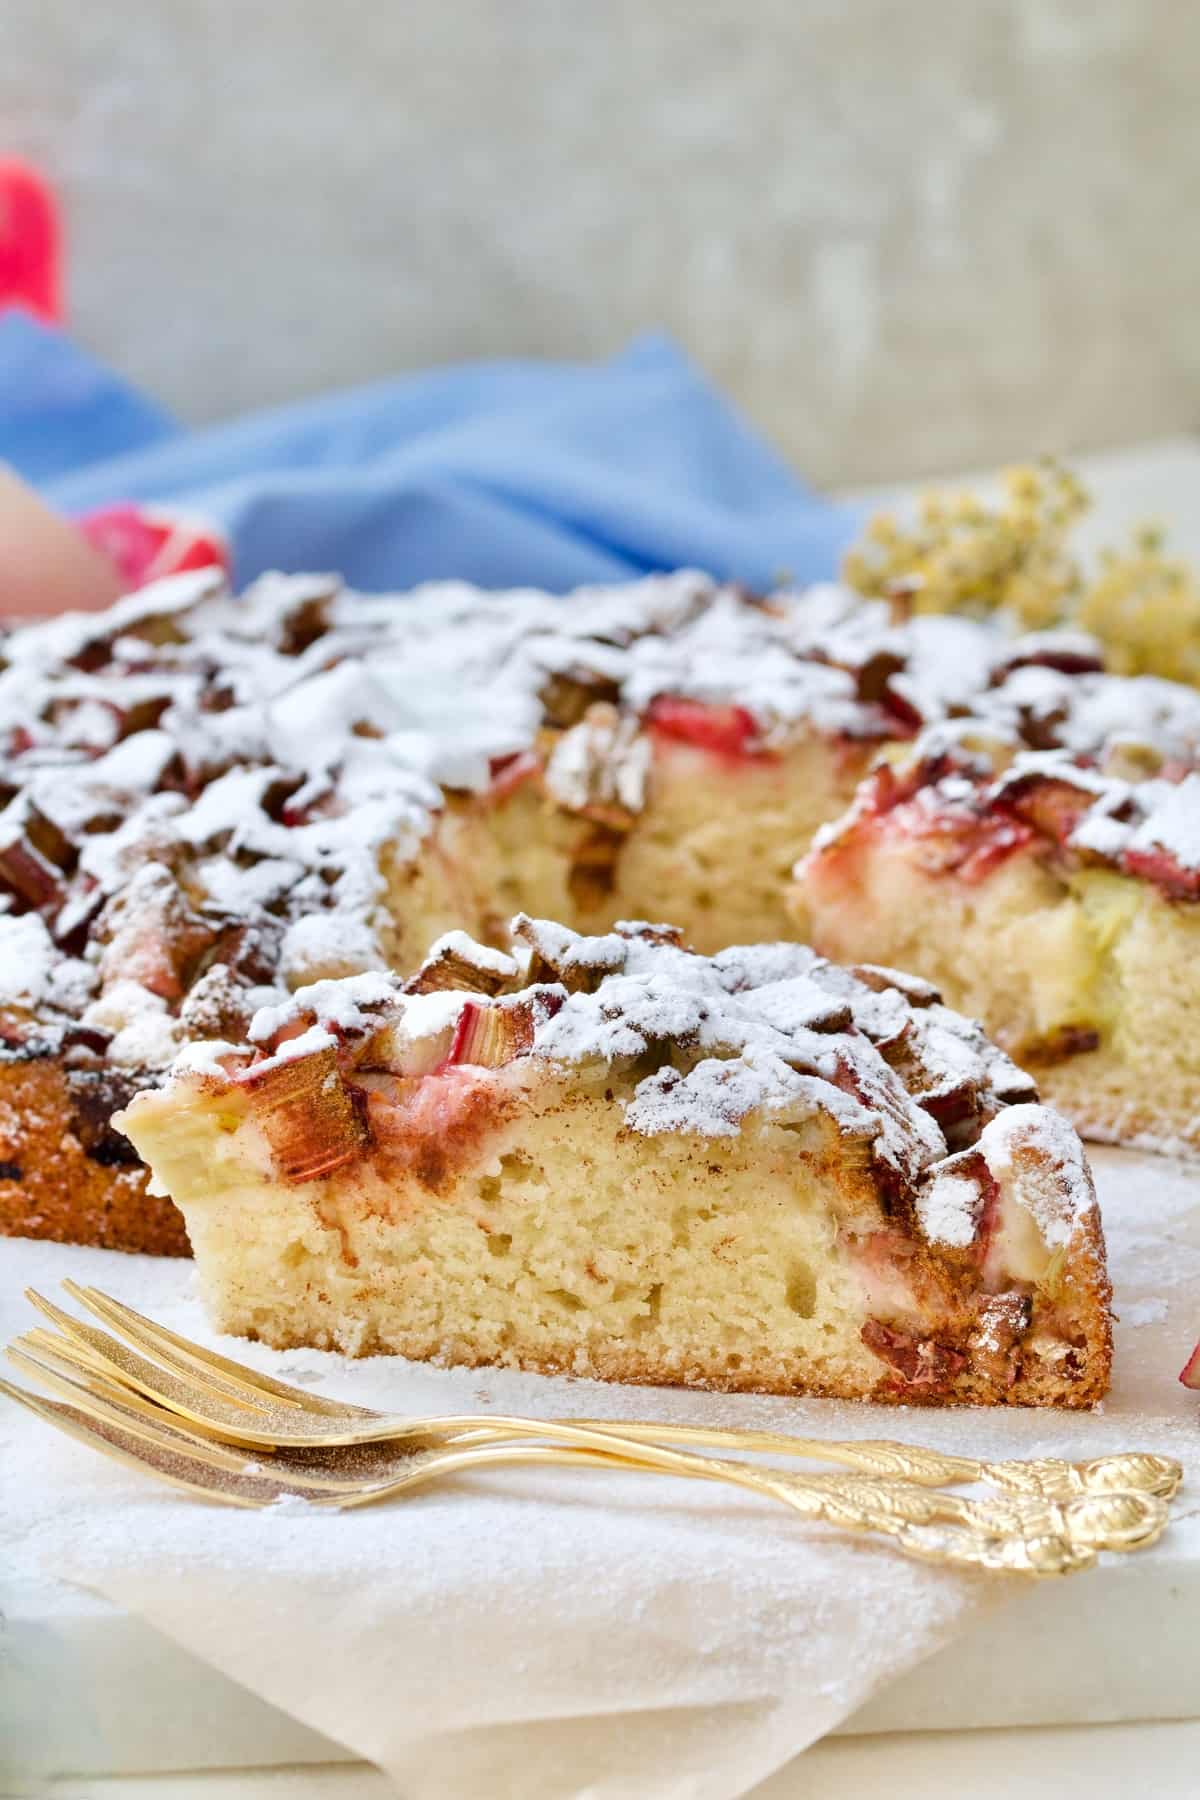 Slice of rhubarb cake with forks in front of it.